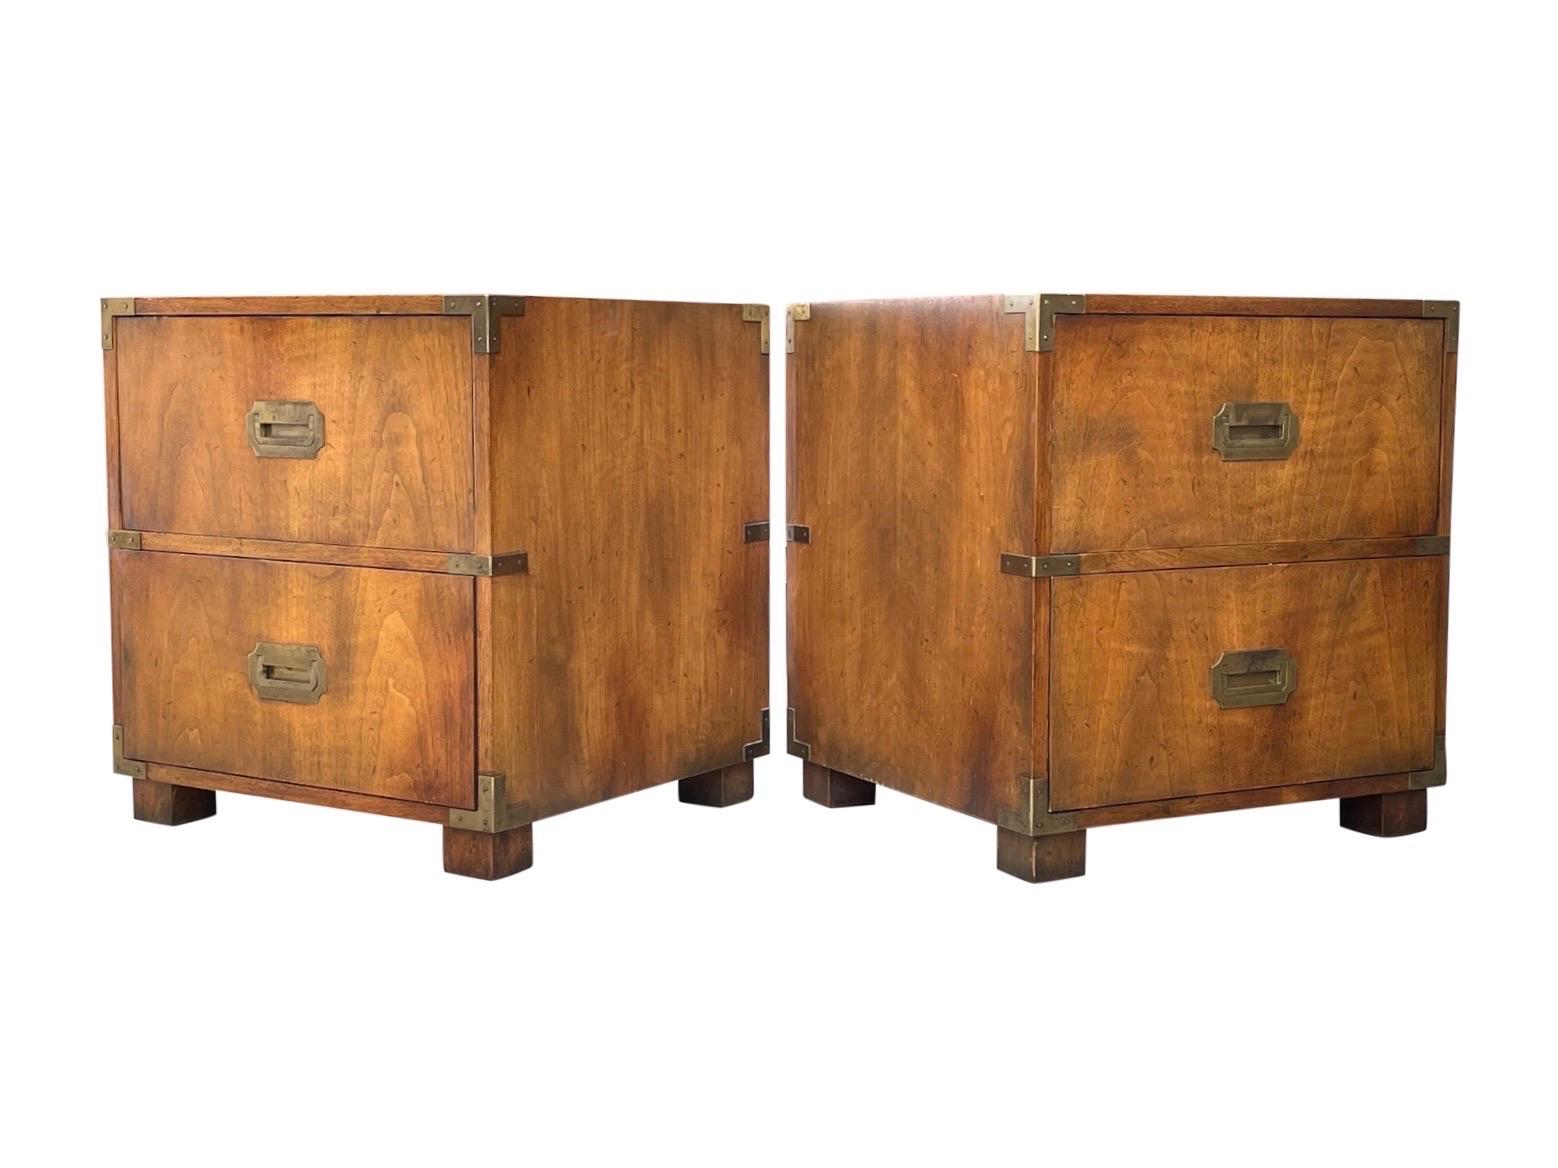 Pair of Baker Furniture midcentury Campaign style nightstands made of mahogany with brass hardware and unique fold down drawer front. With original Baker label.